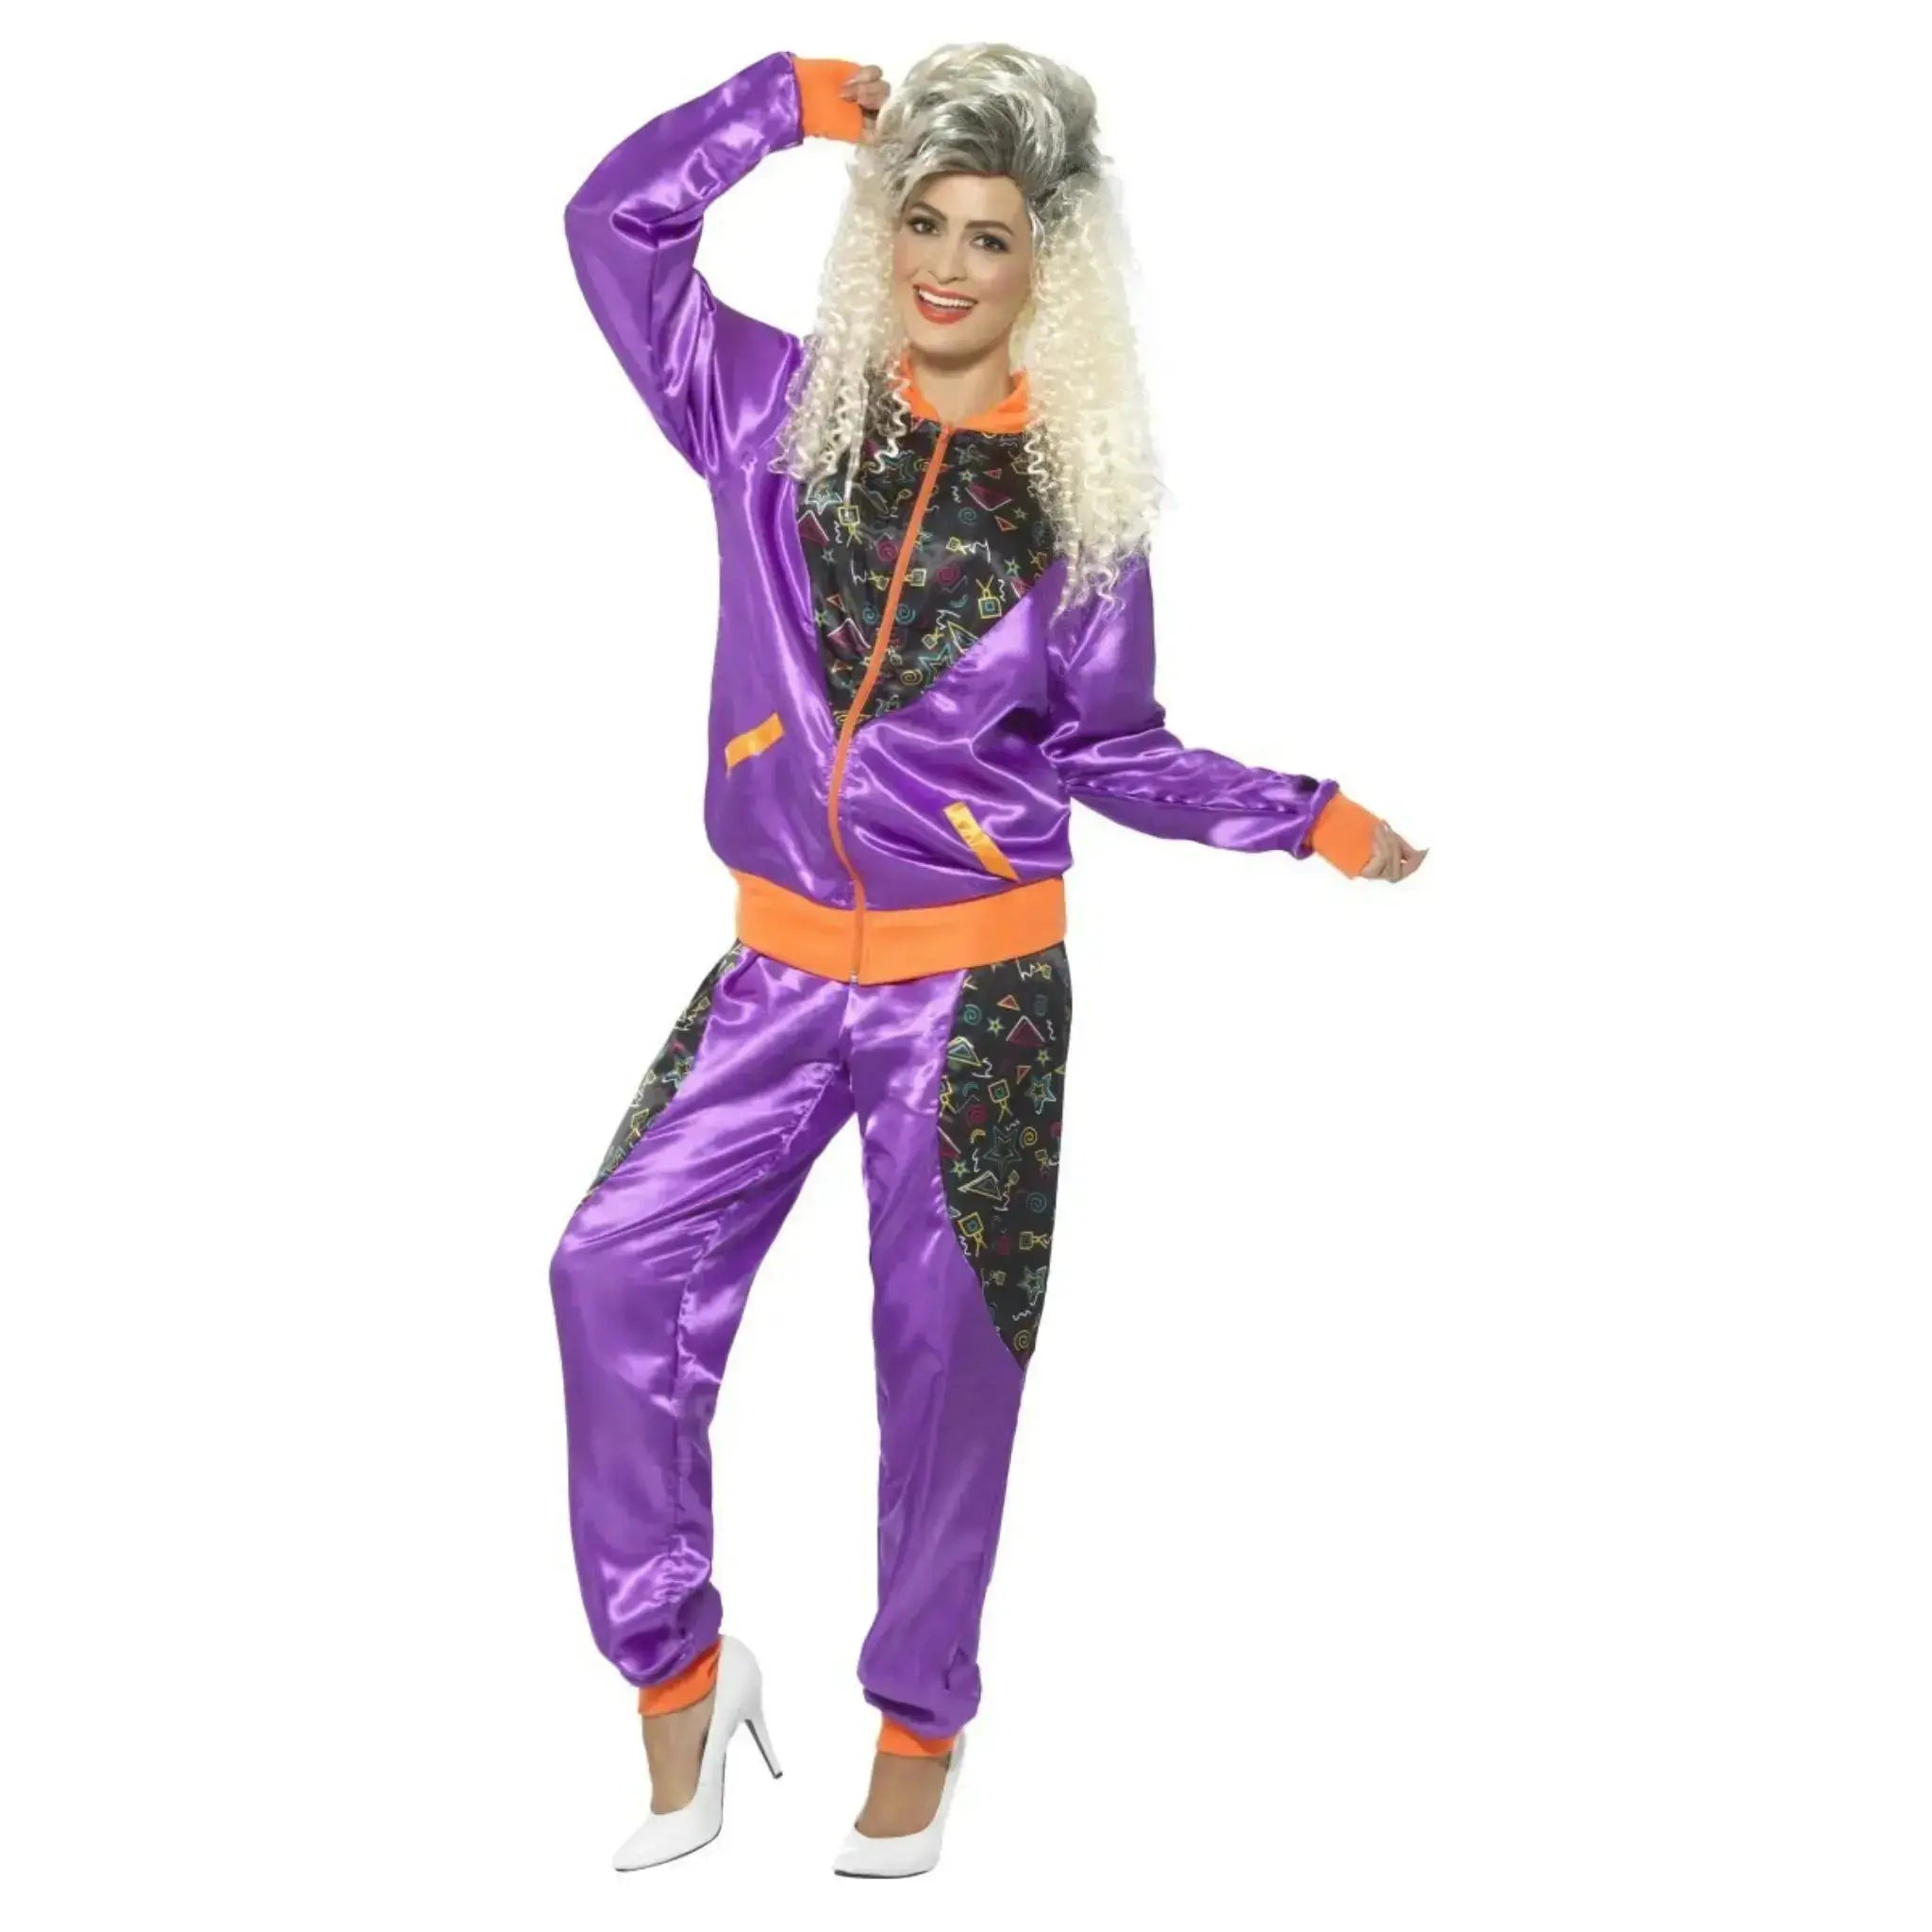 Retro Shell Suit Costume Ladies | The Party Hut